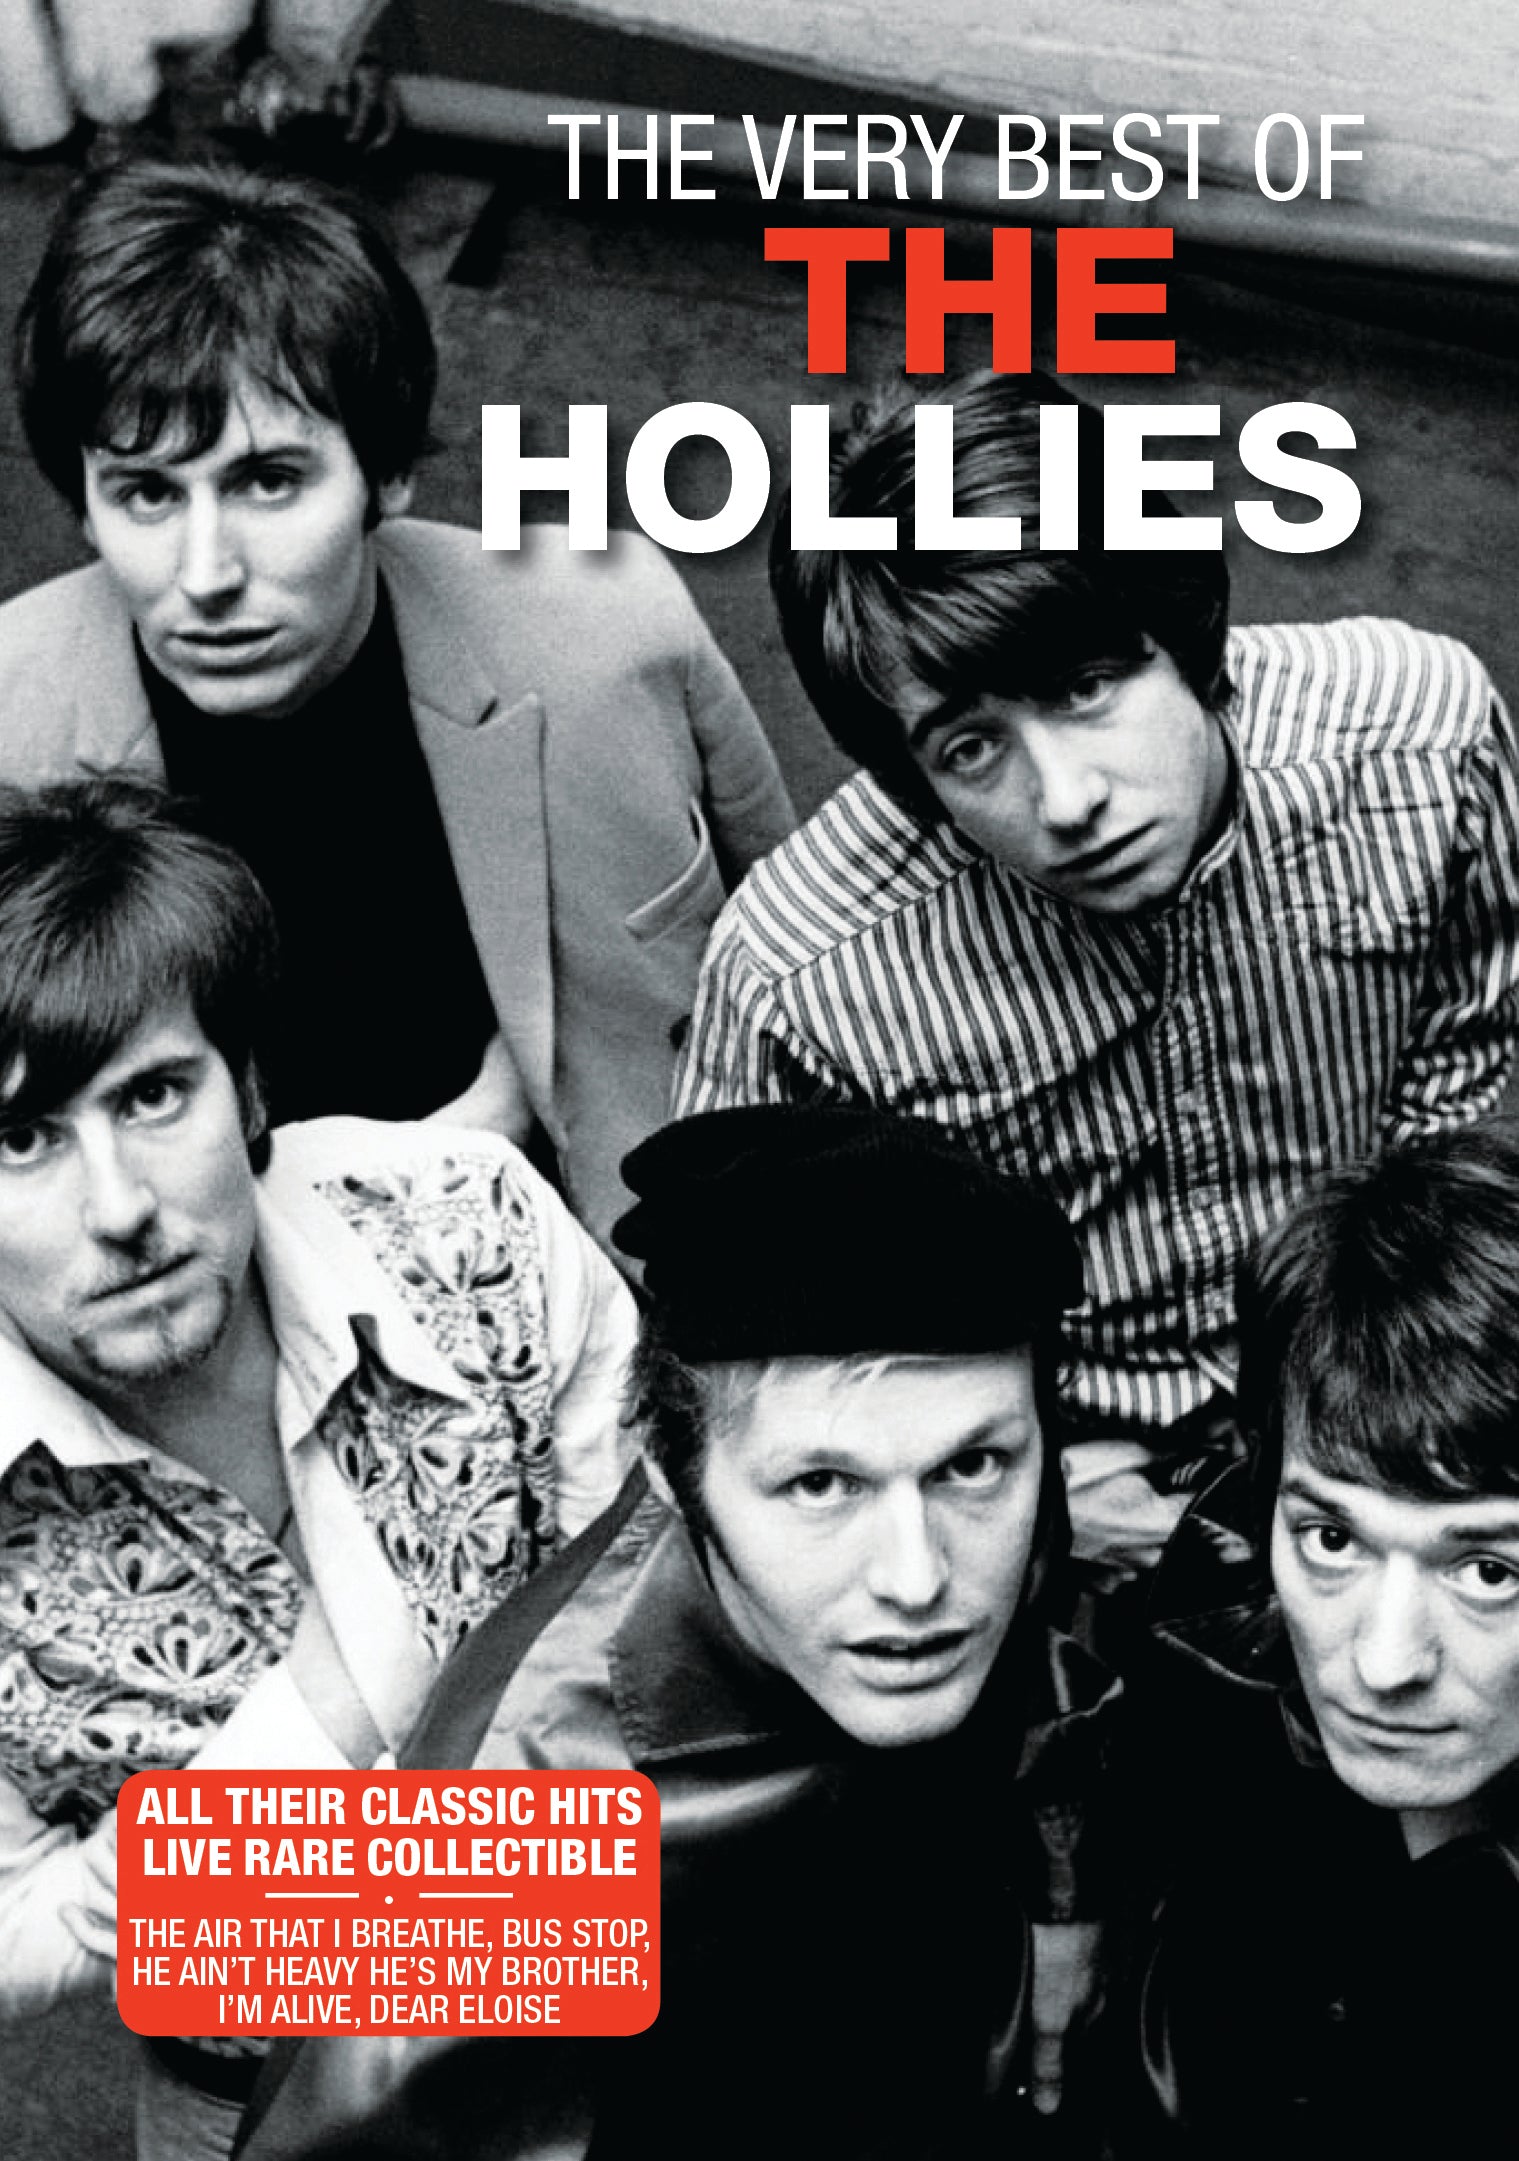 THE HOLLIES - THE VERY BEST OF THE HOLLIES